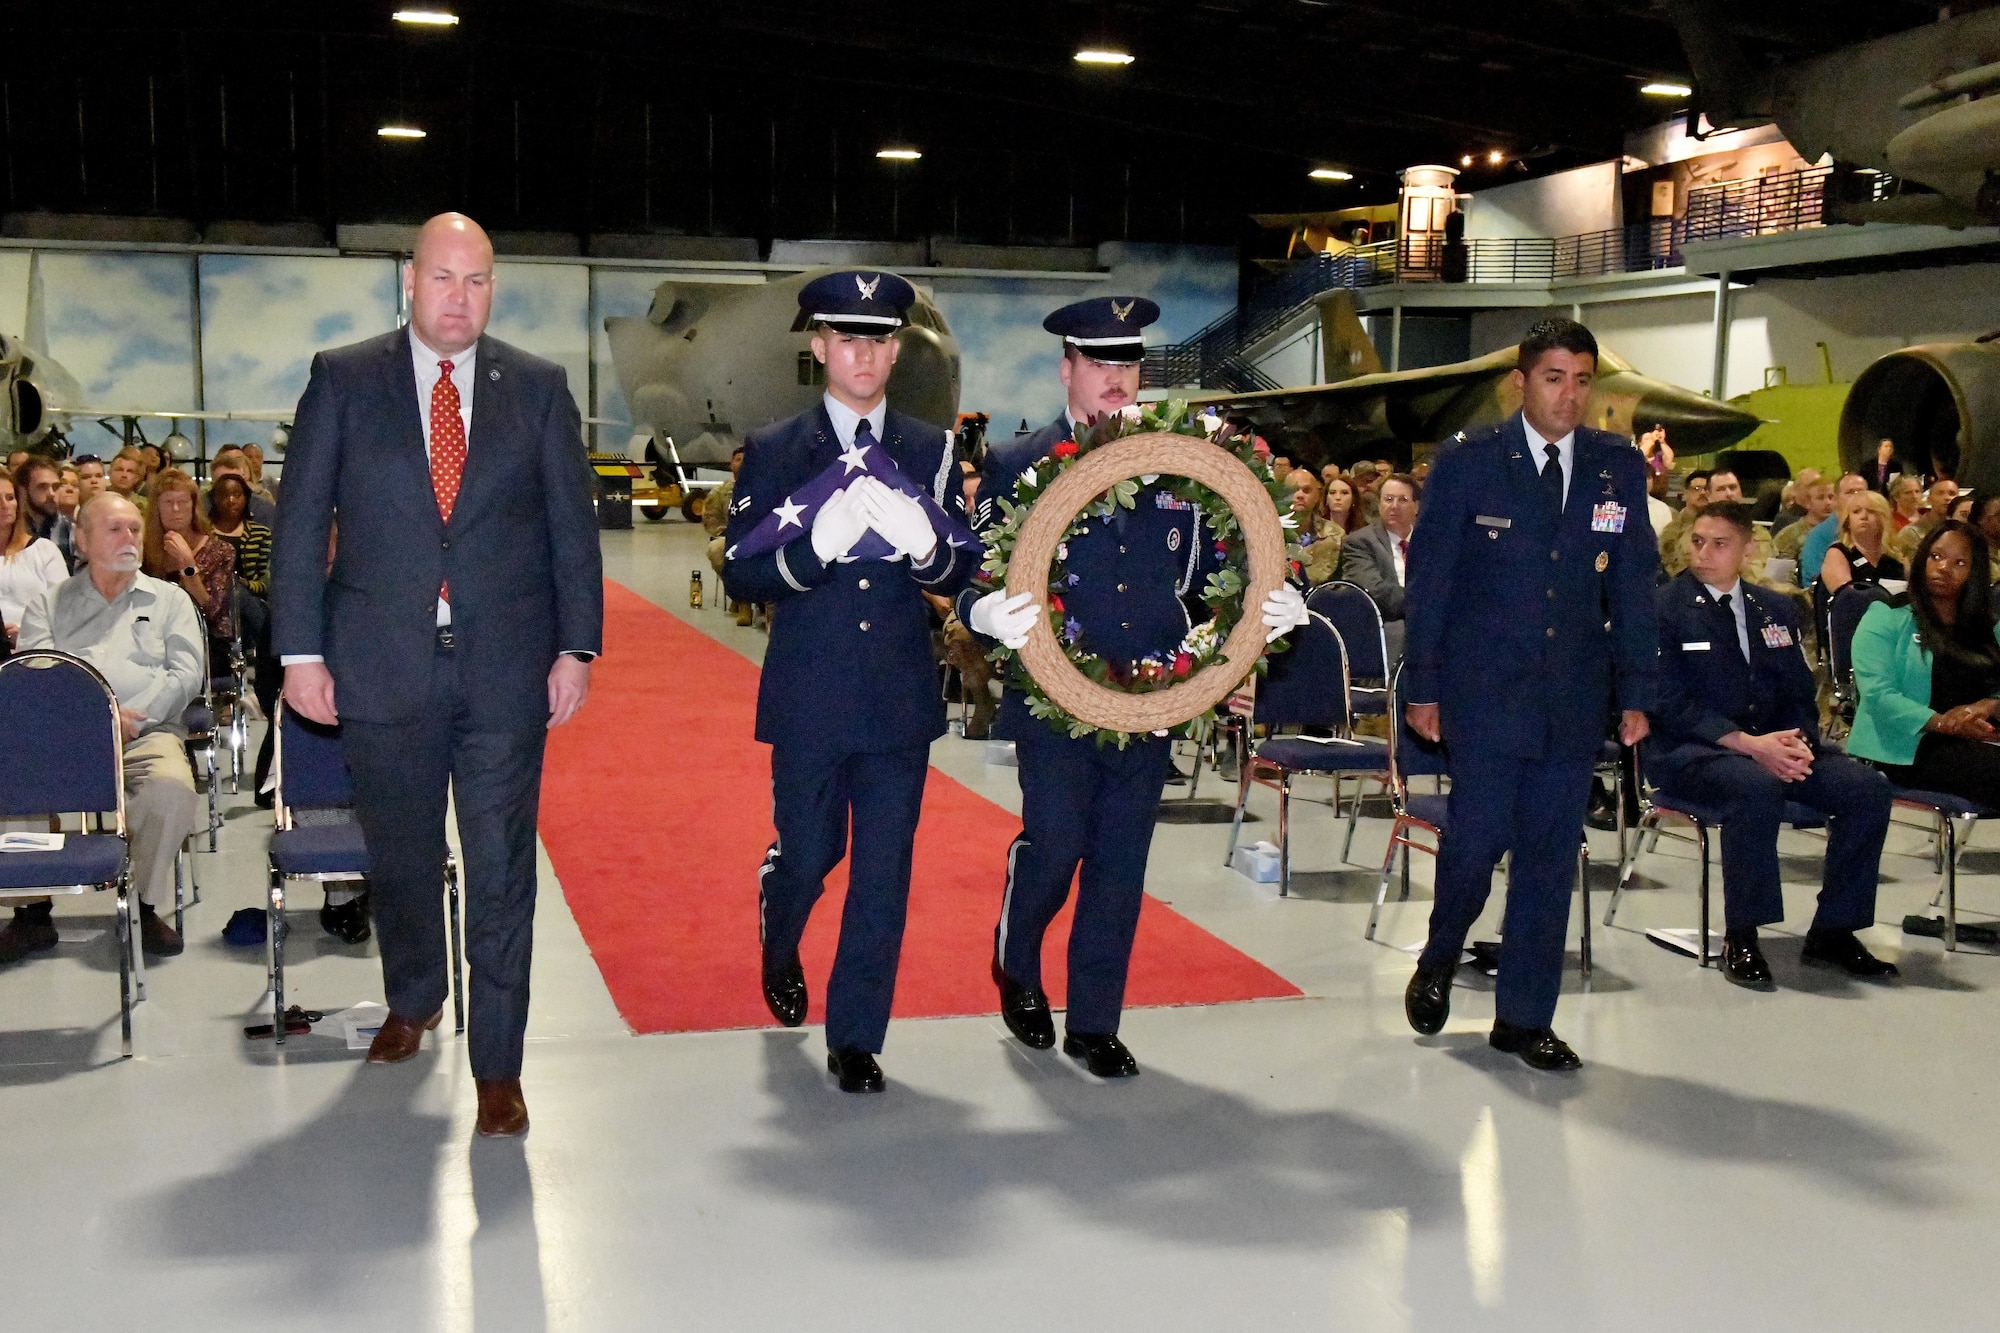 A group of three men in military uniforms, with one man in a suit, walking down a runway. One man is holding a wreath.